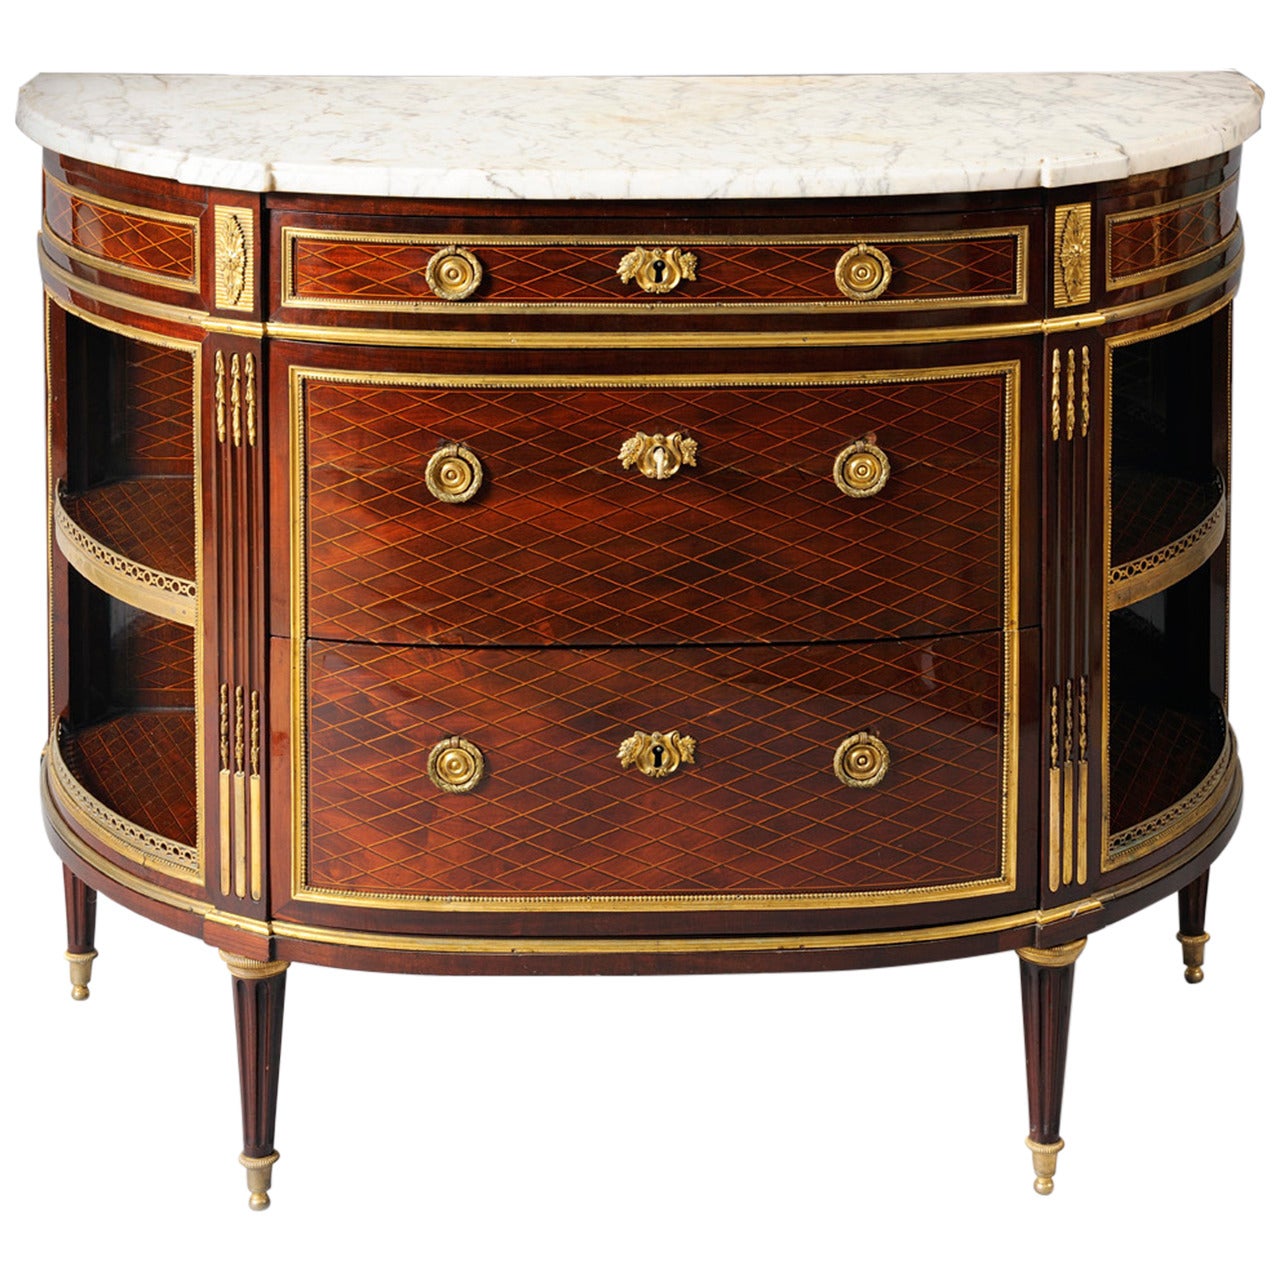 Exceptional Demilune Commode Attributed to Riesener